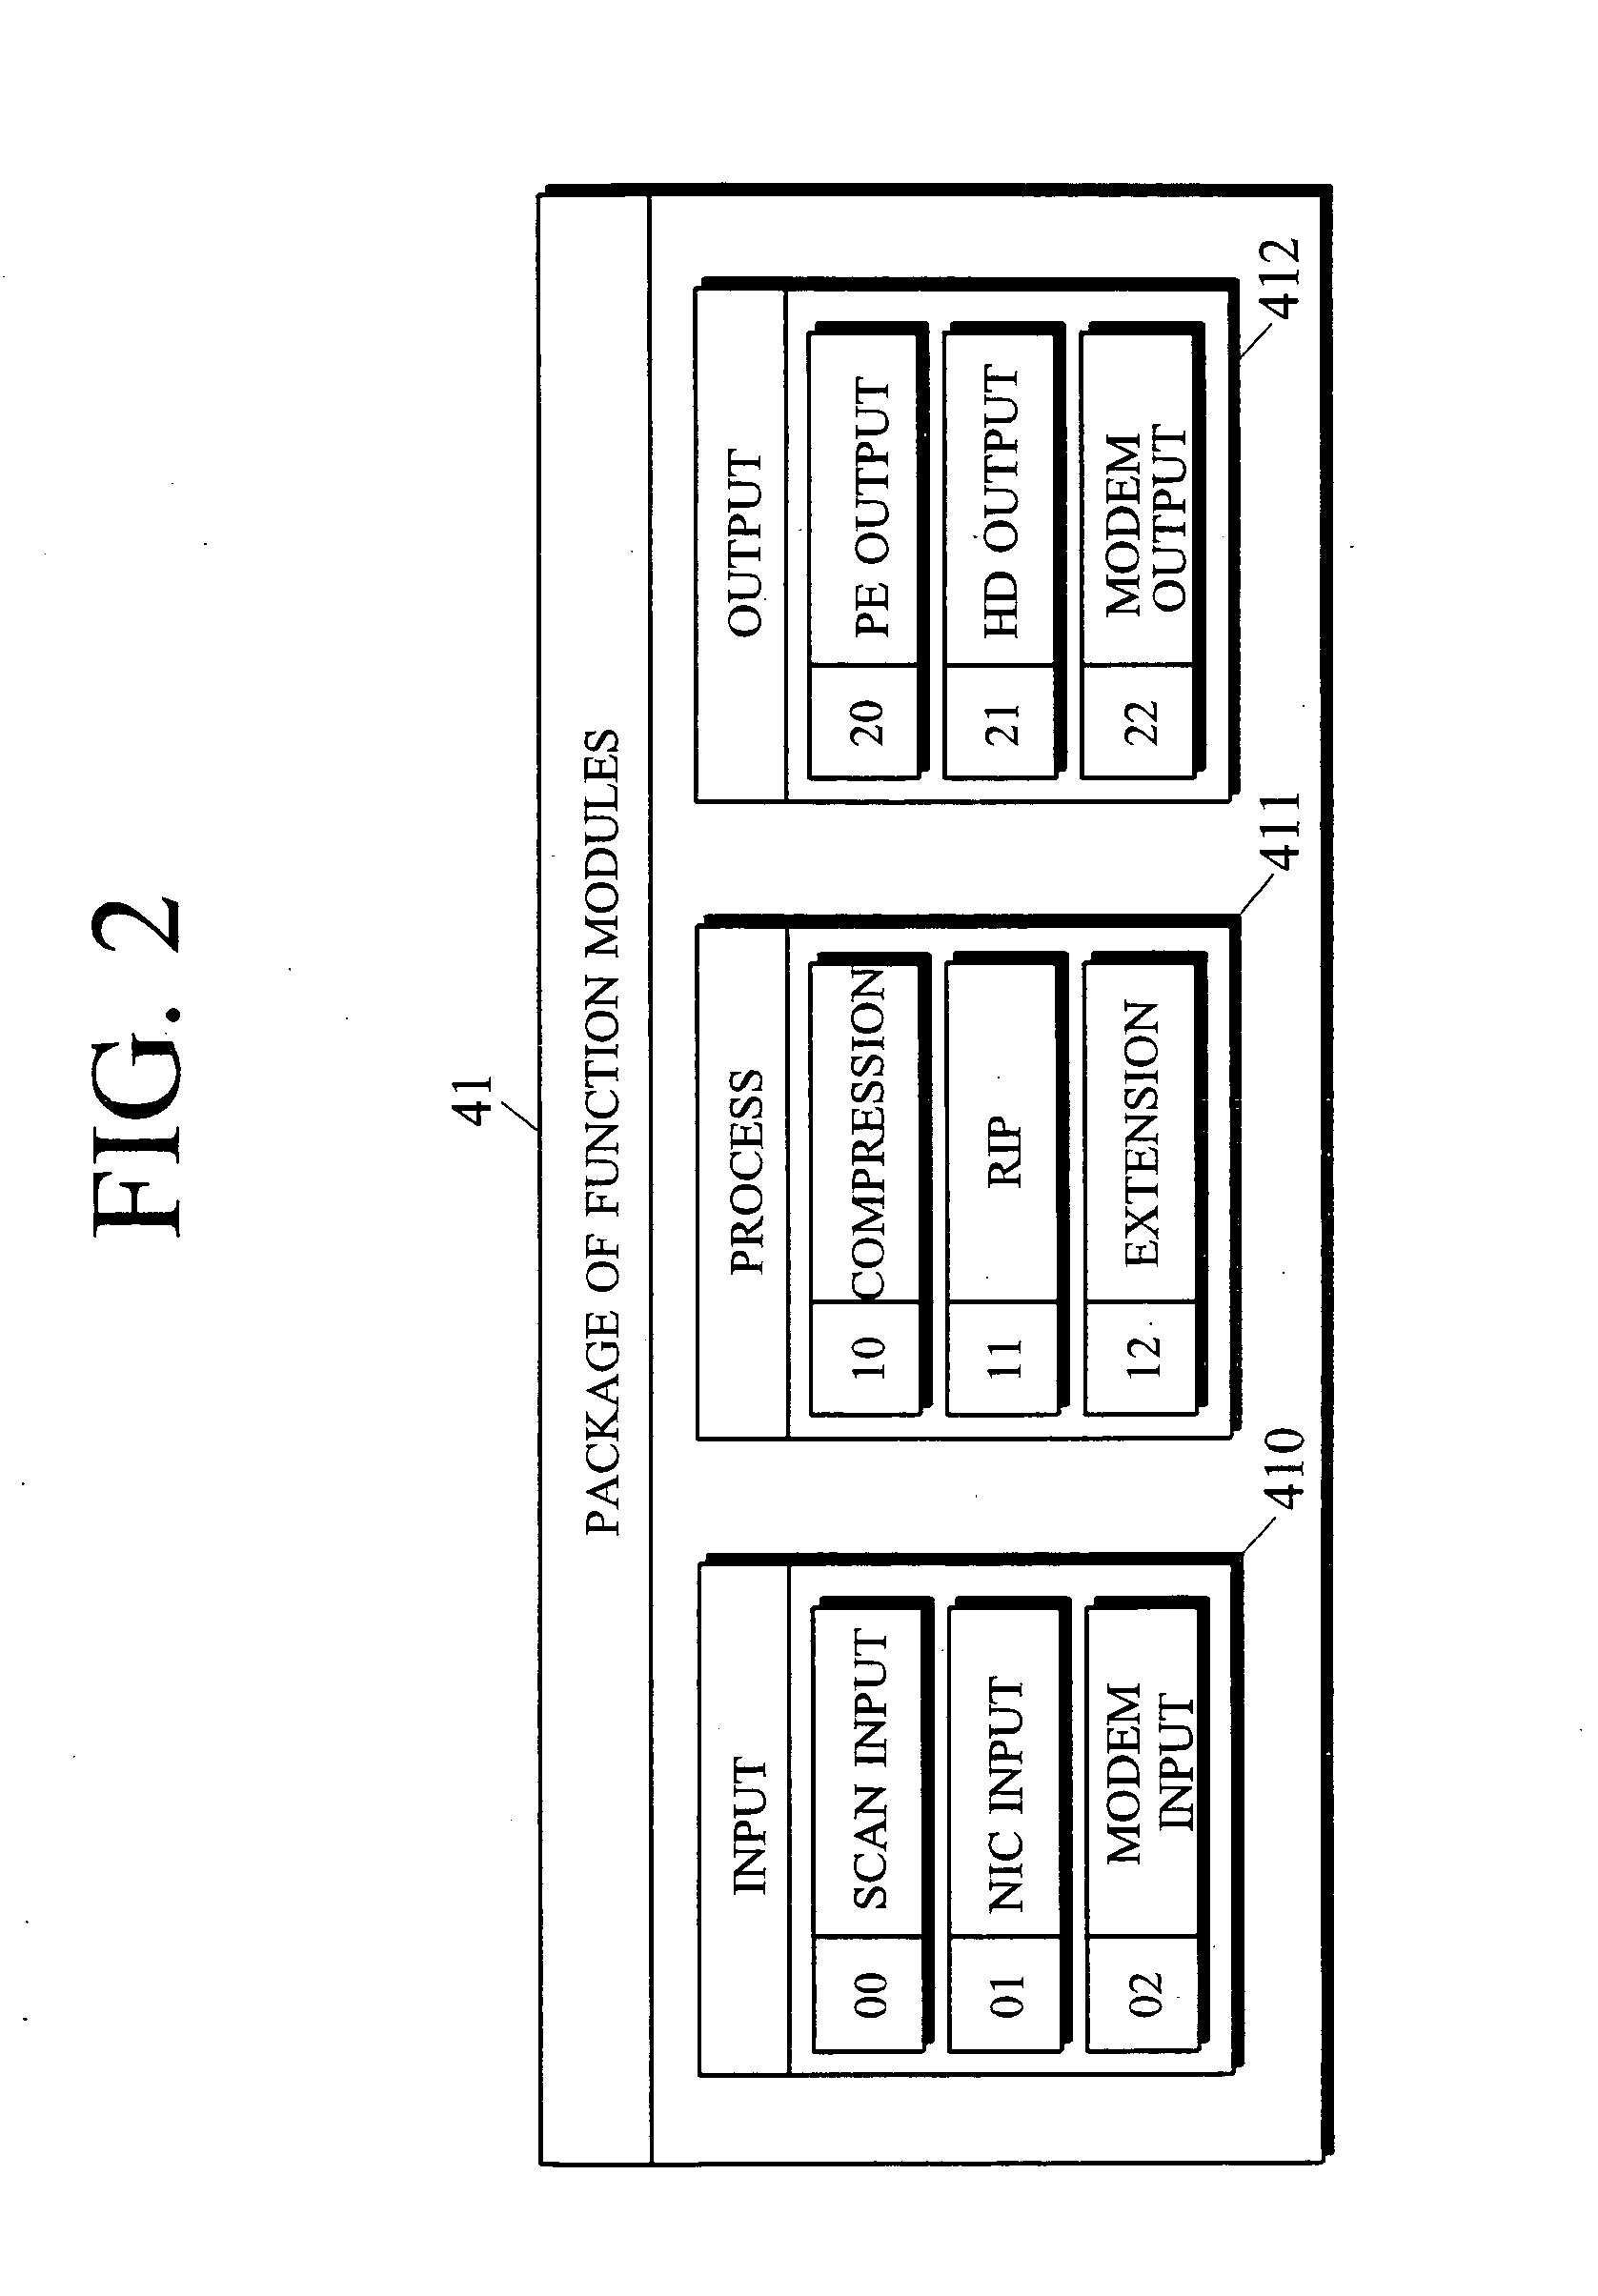 Multi-function peripheral apparatus for processing unified job steps